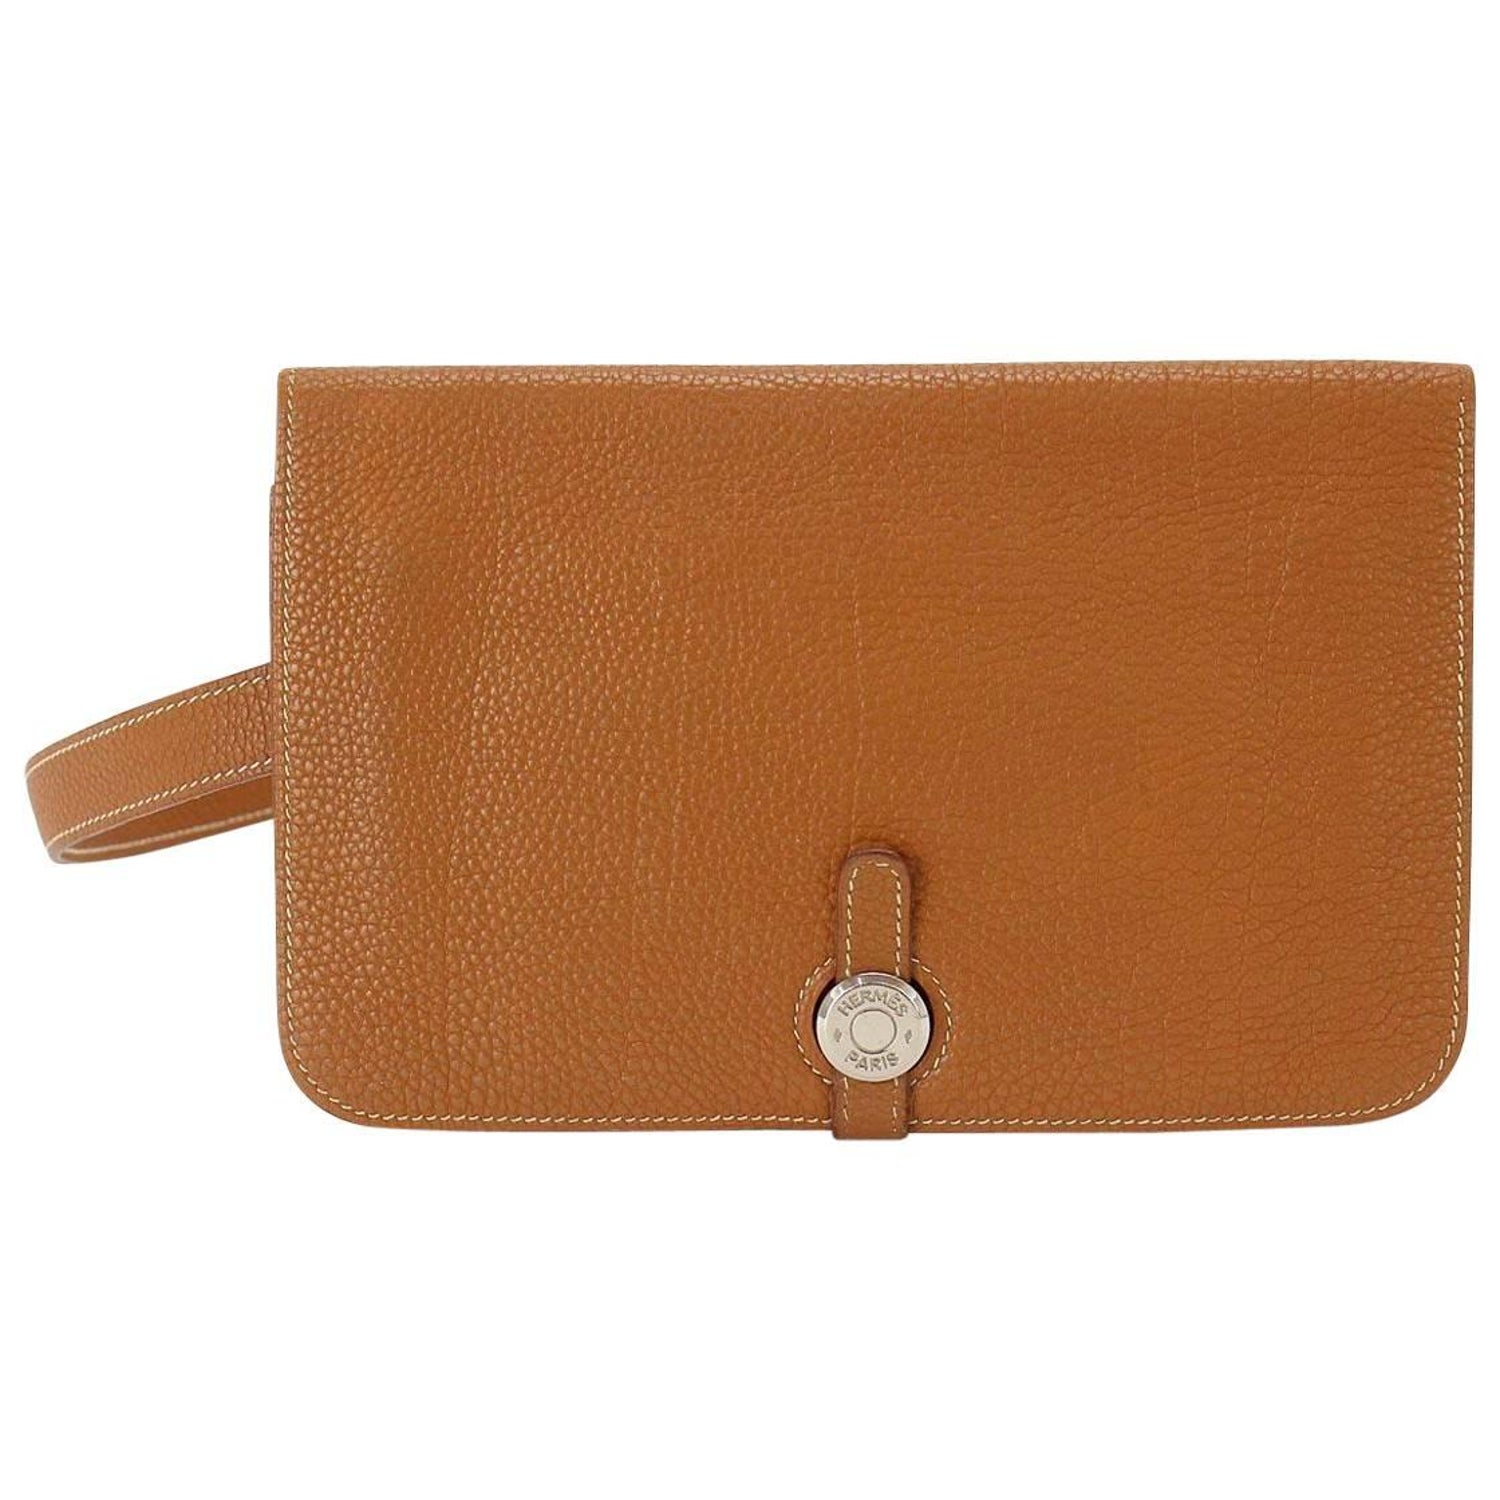 Ttop Quality Hermes Clutches Bags for Men in Magodo - Bags